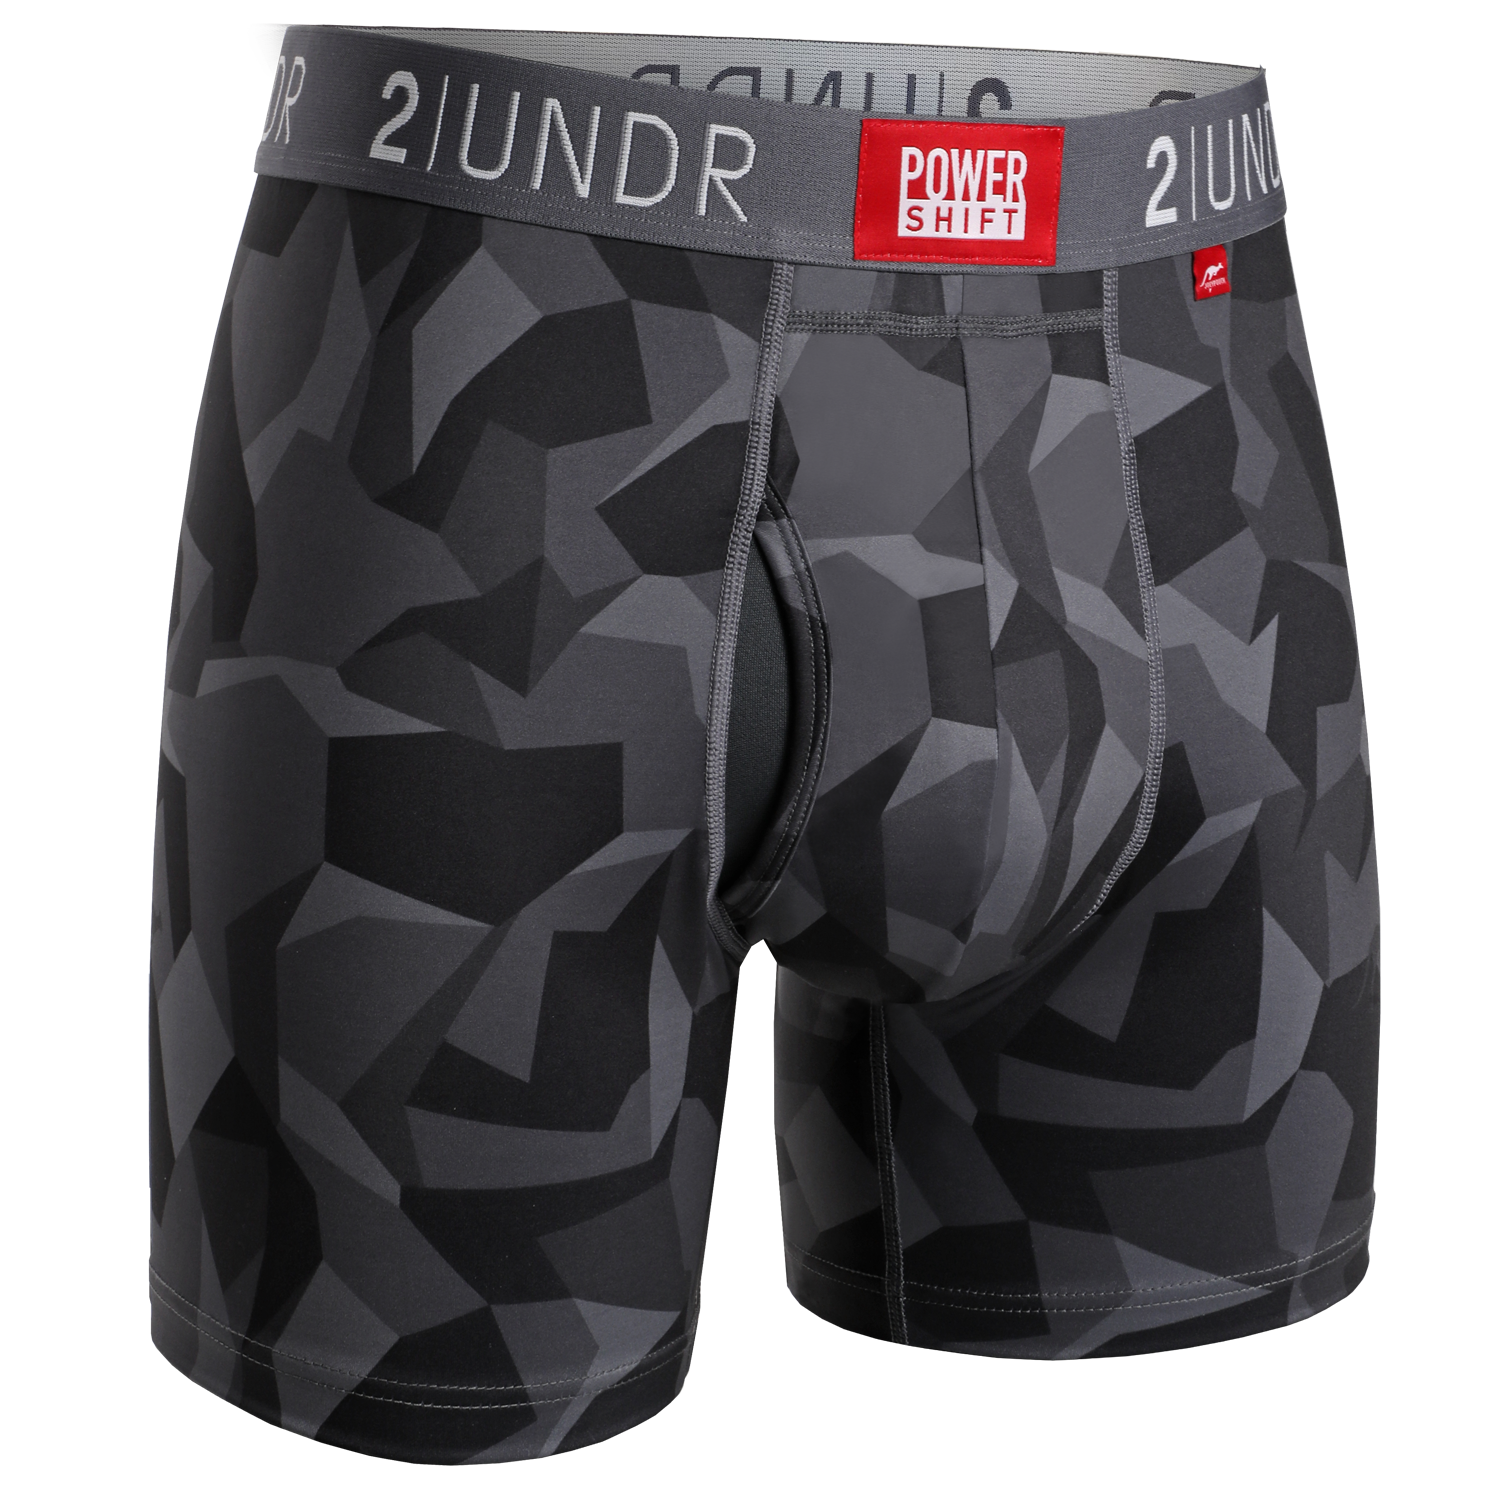 2Undr Power Shift Collection